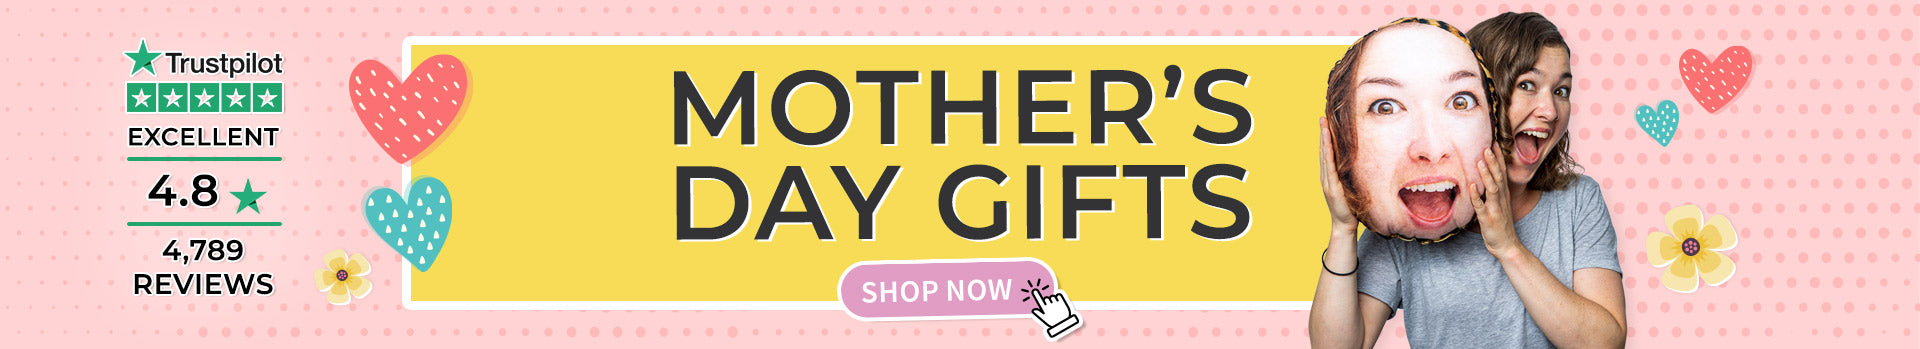 Web-Banner-Mother's-Day-Nosale.jpg__PID:417f0a89-4006-4cc7-8d71-9766315a1ea4